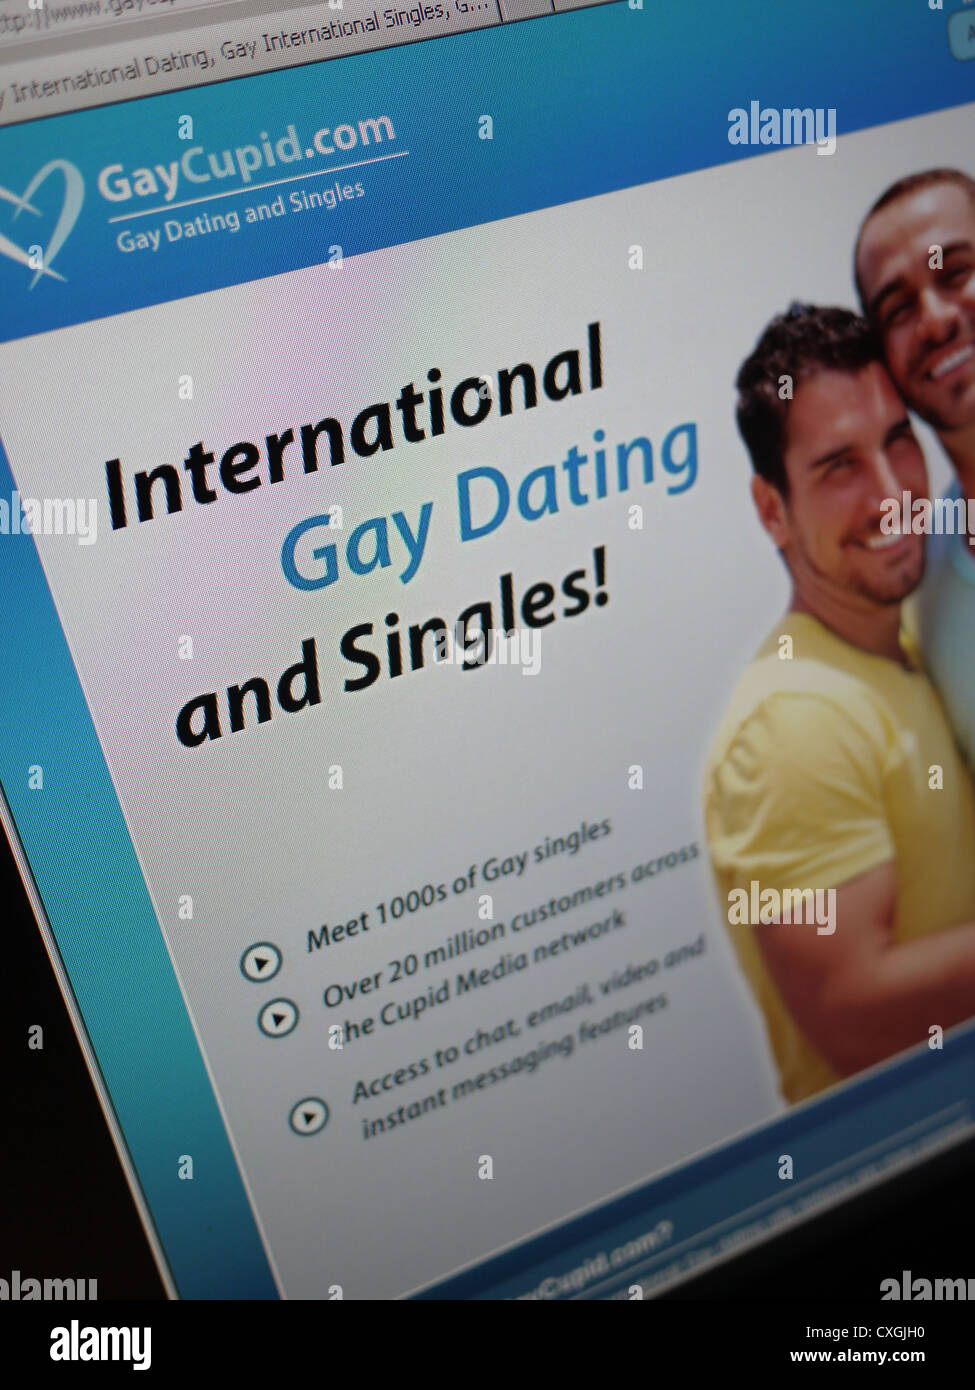 instant gay dating